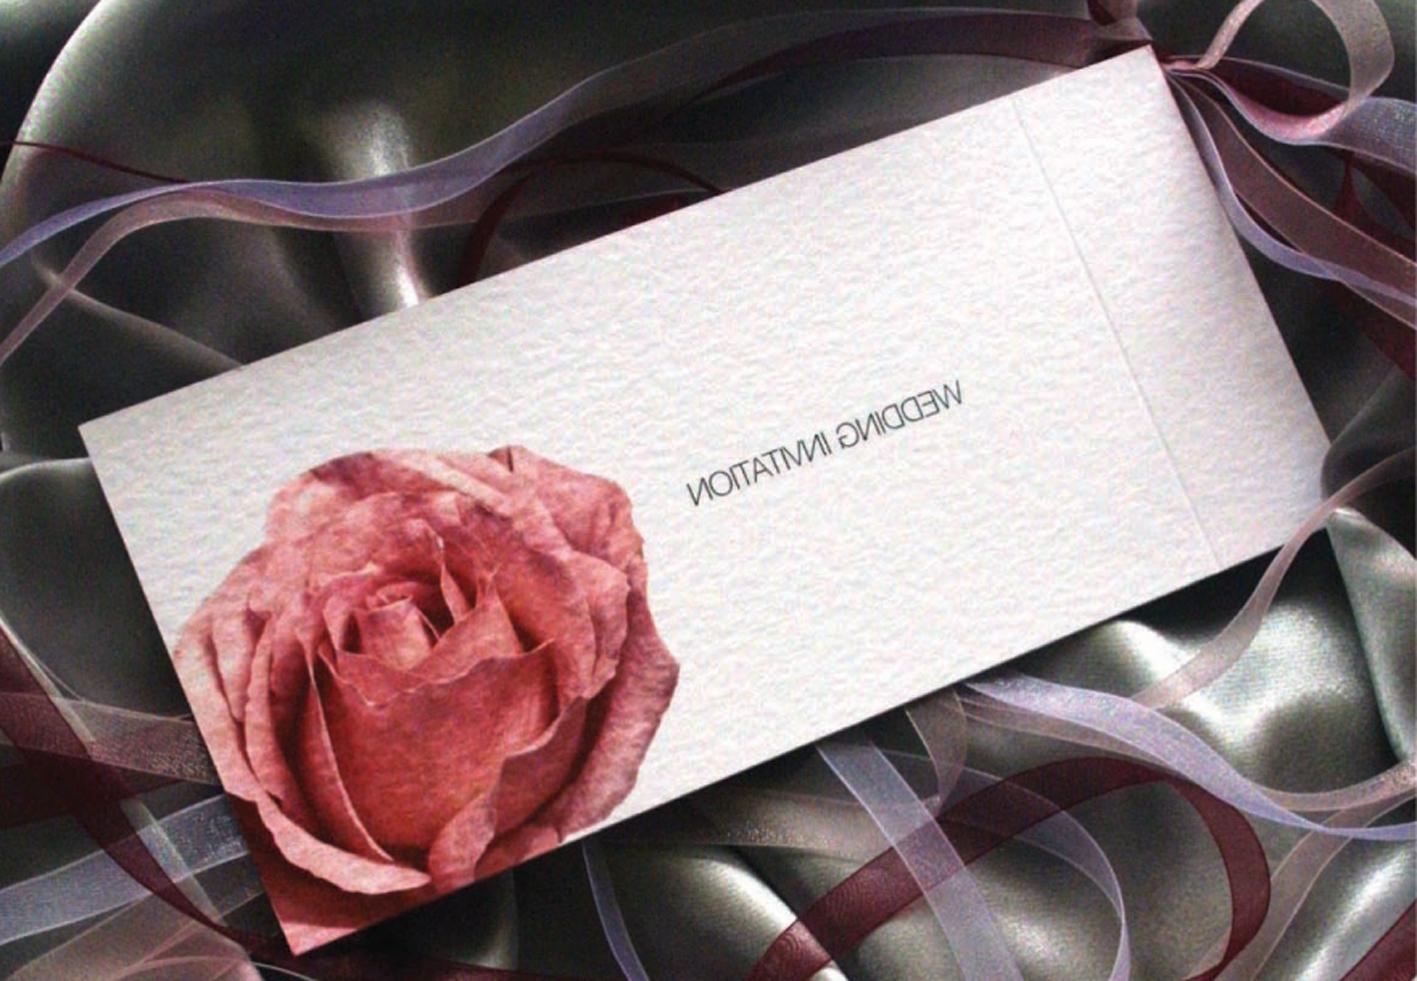 An invitation which opens to